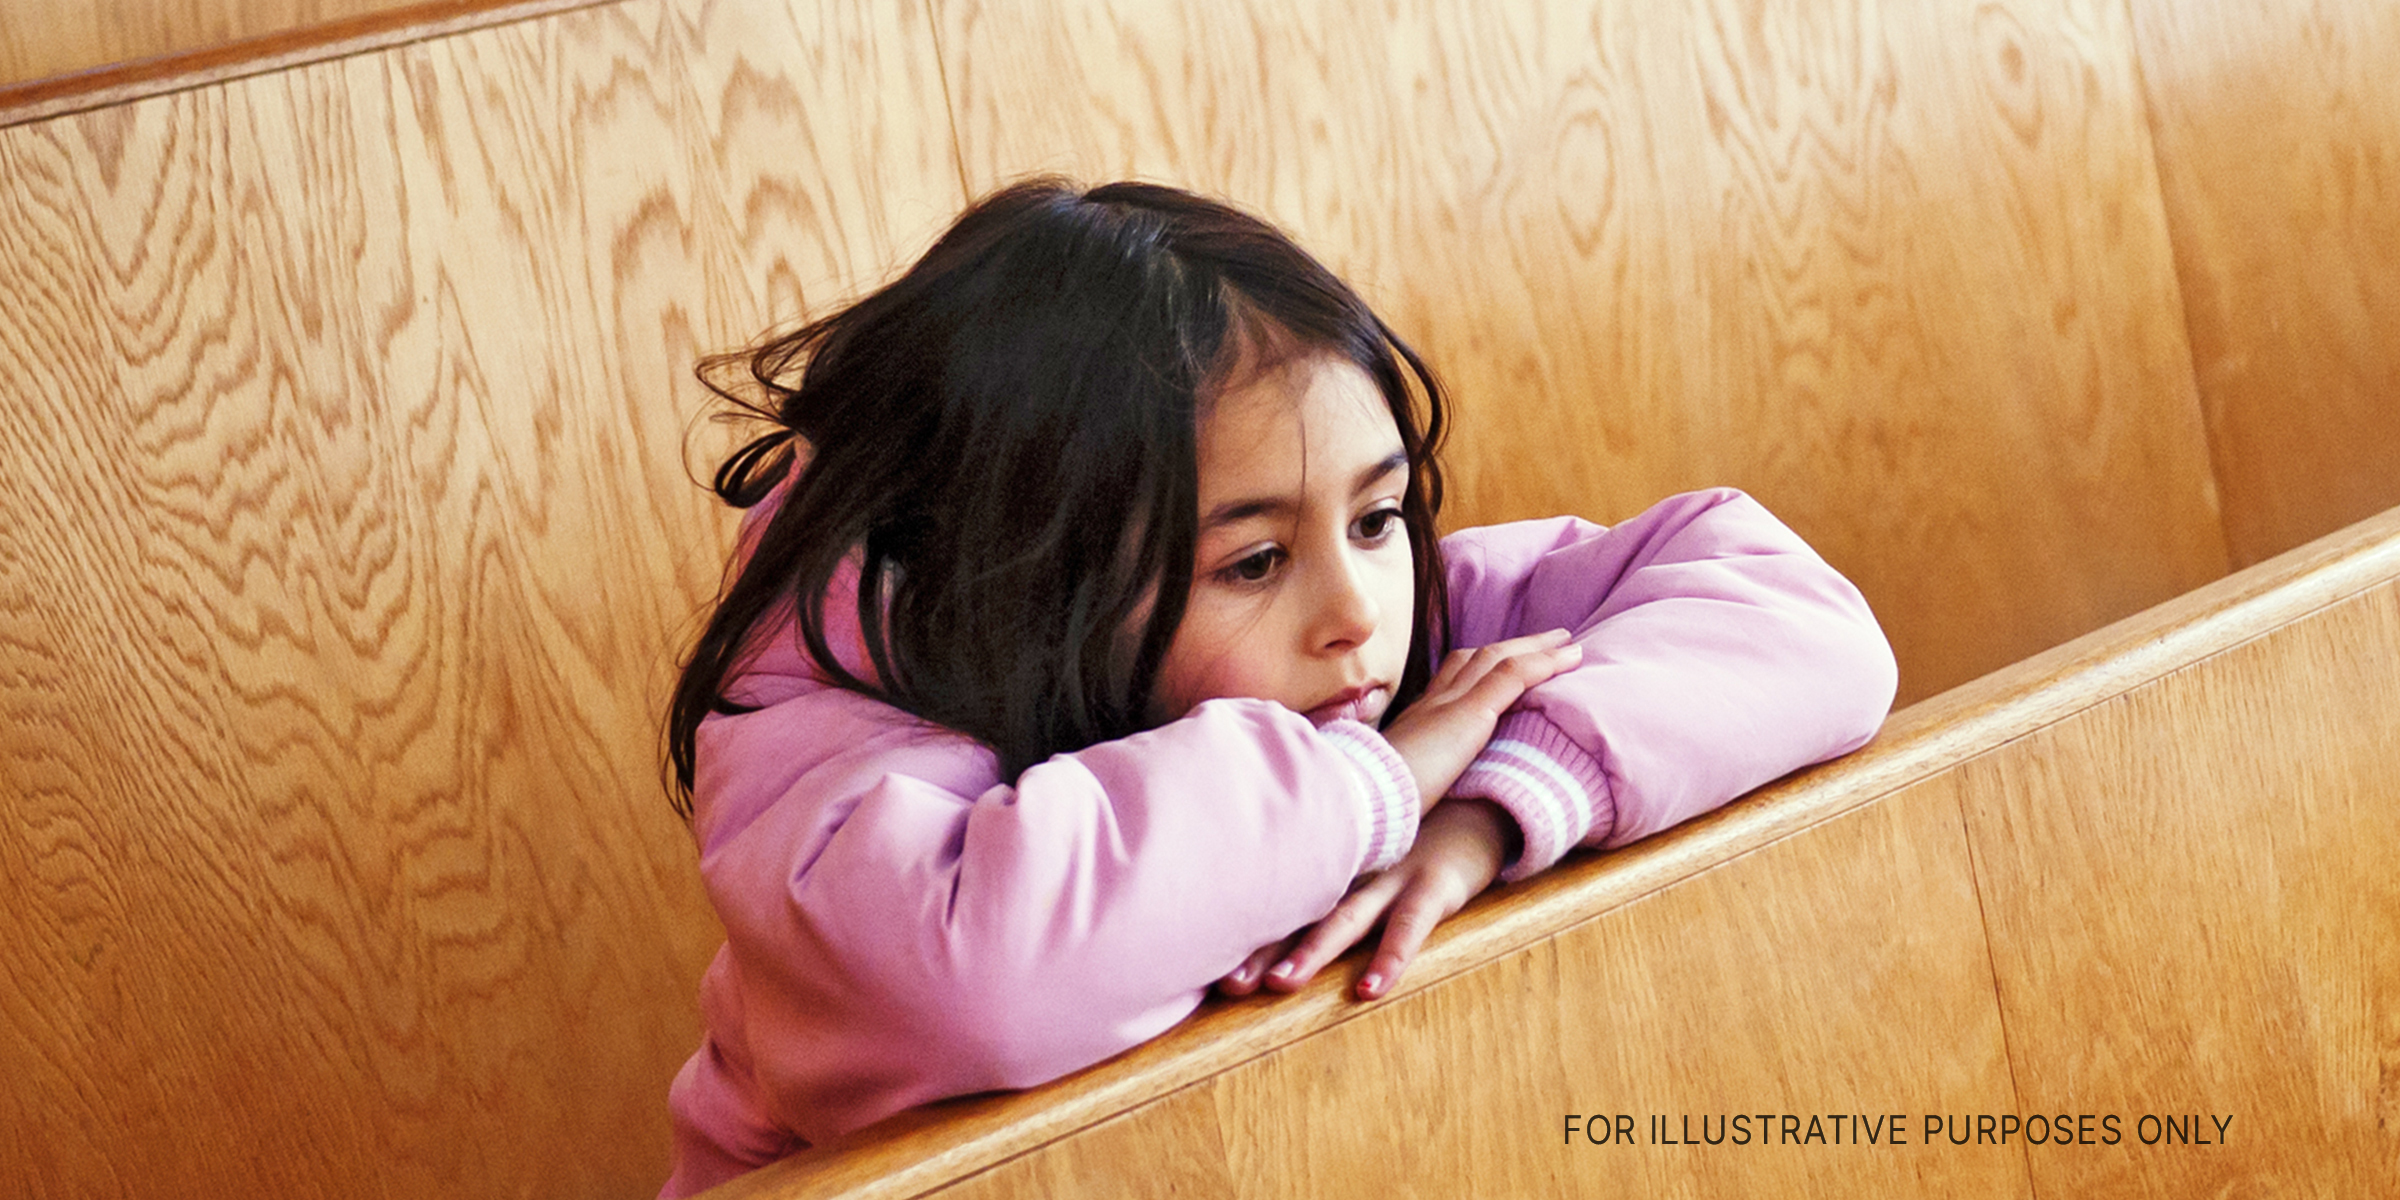 Little girl leaning between pews. | Source: Getty Images